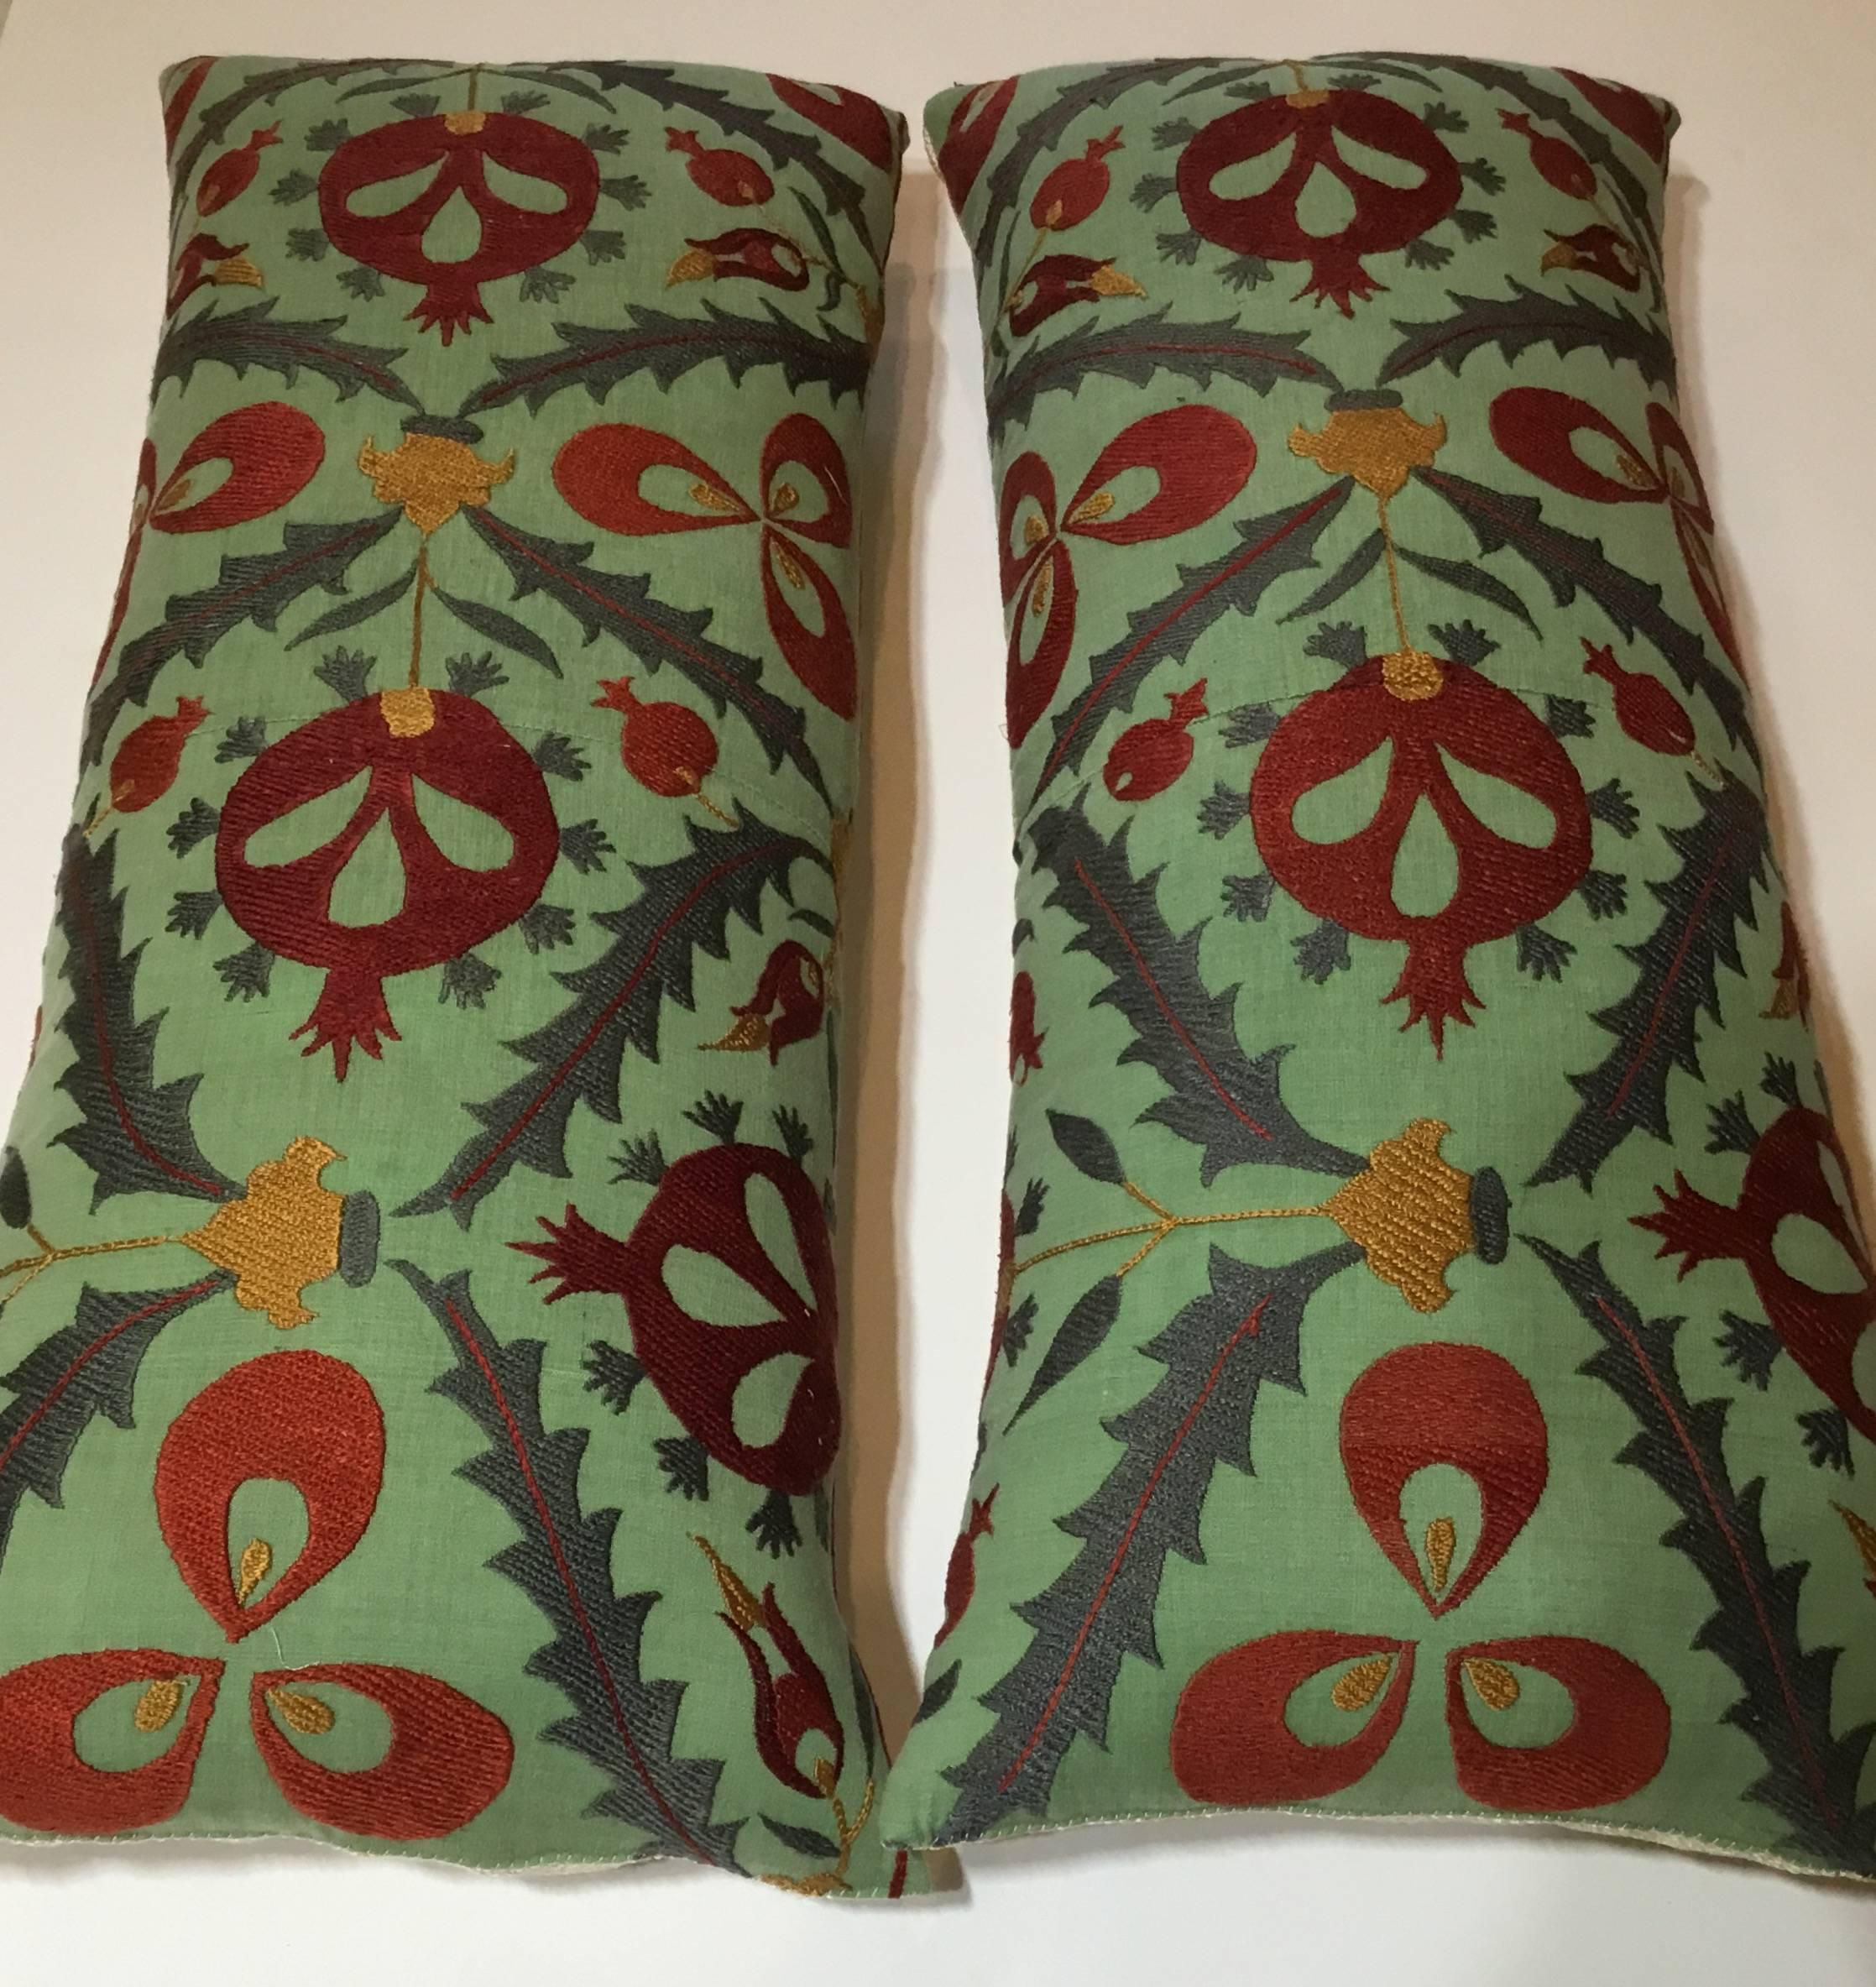 Cotton Pair of Hand Embroidery Suzani Pillows